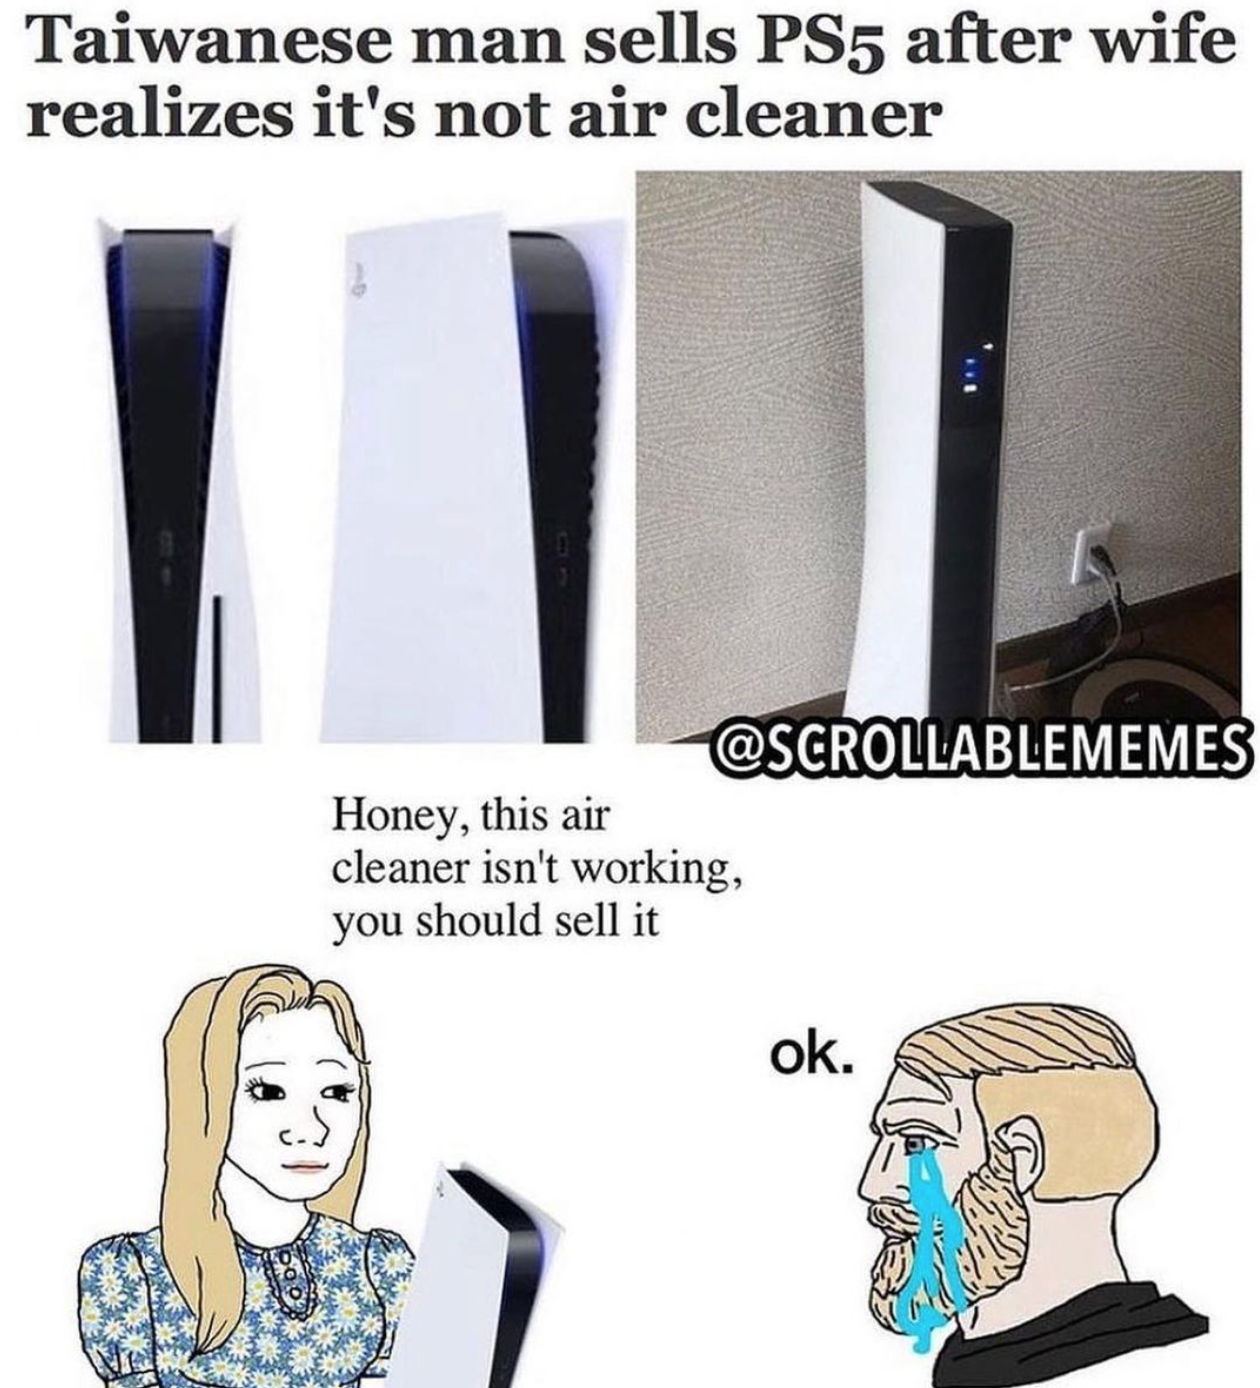 funny gaming memes - customer lifetime value - Taiwanese man sells PS5 after wife realizes it's not air cleaner Honey, this air cleaner isn't working, you should sell it ok.